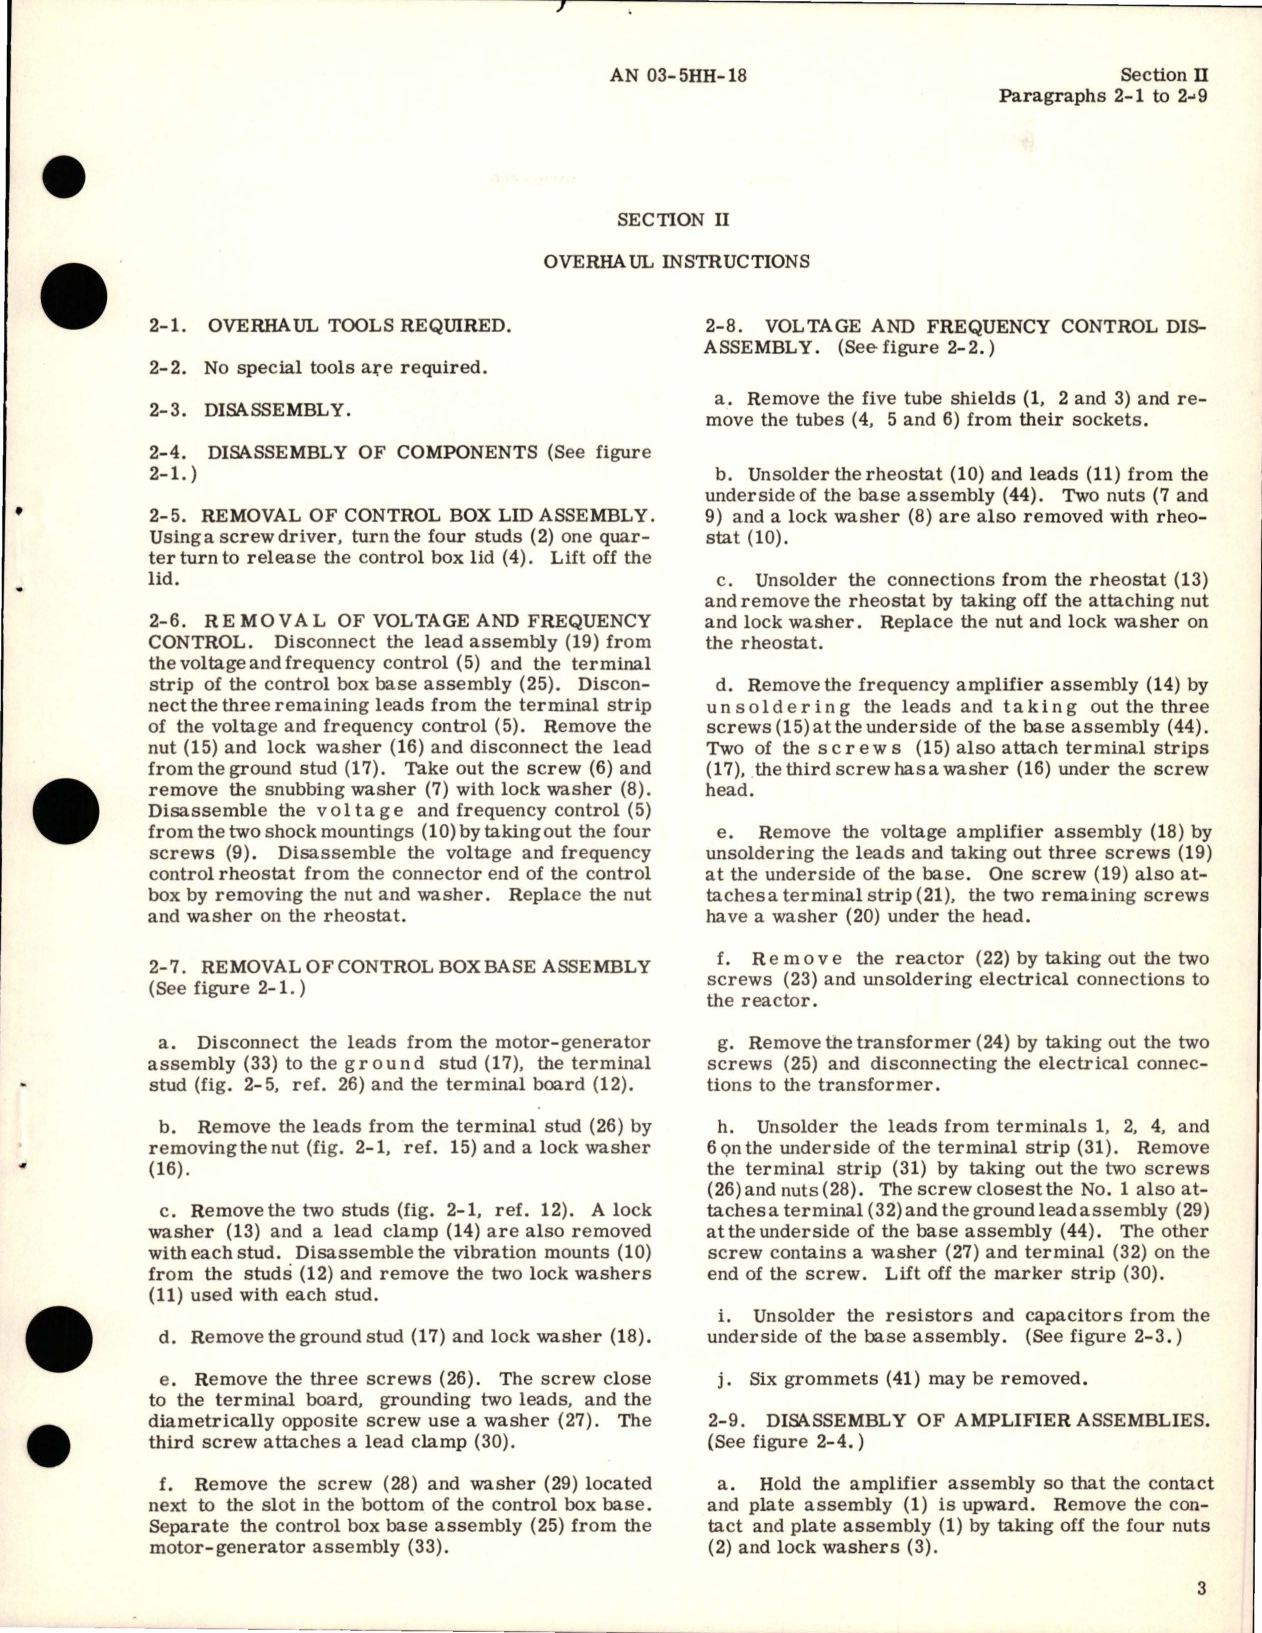 Sample page 7 from AirCorps Library document: Overhaul Instructions for Inverter - Parts SE-8-2 and SE-8-3